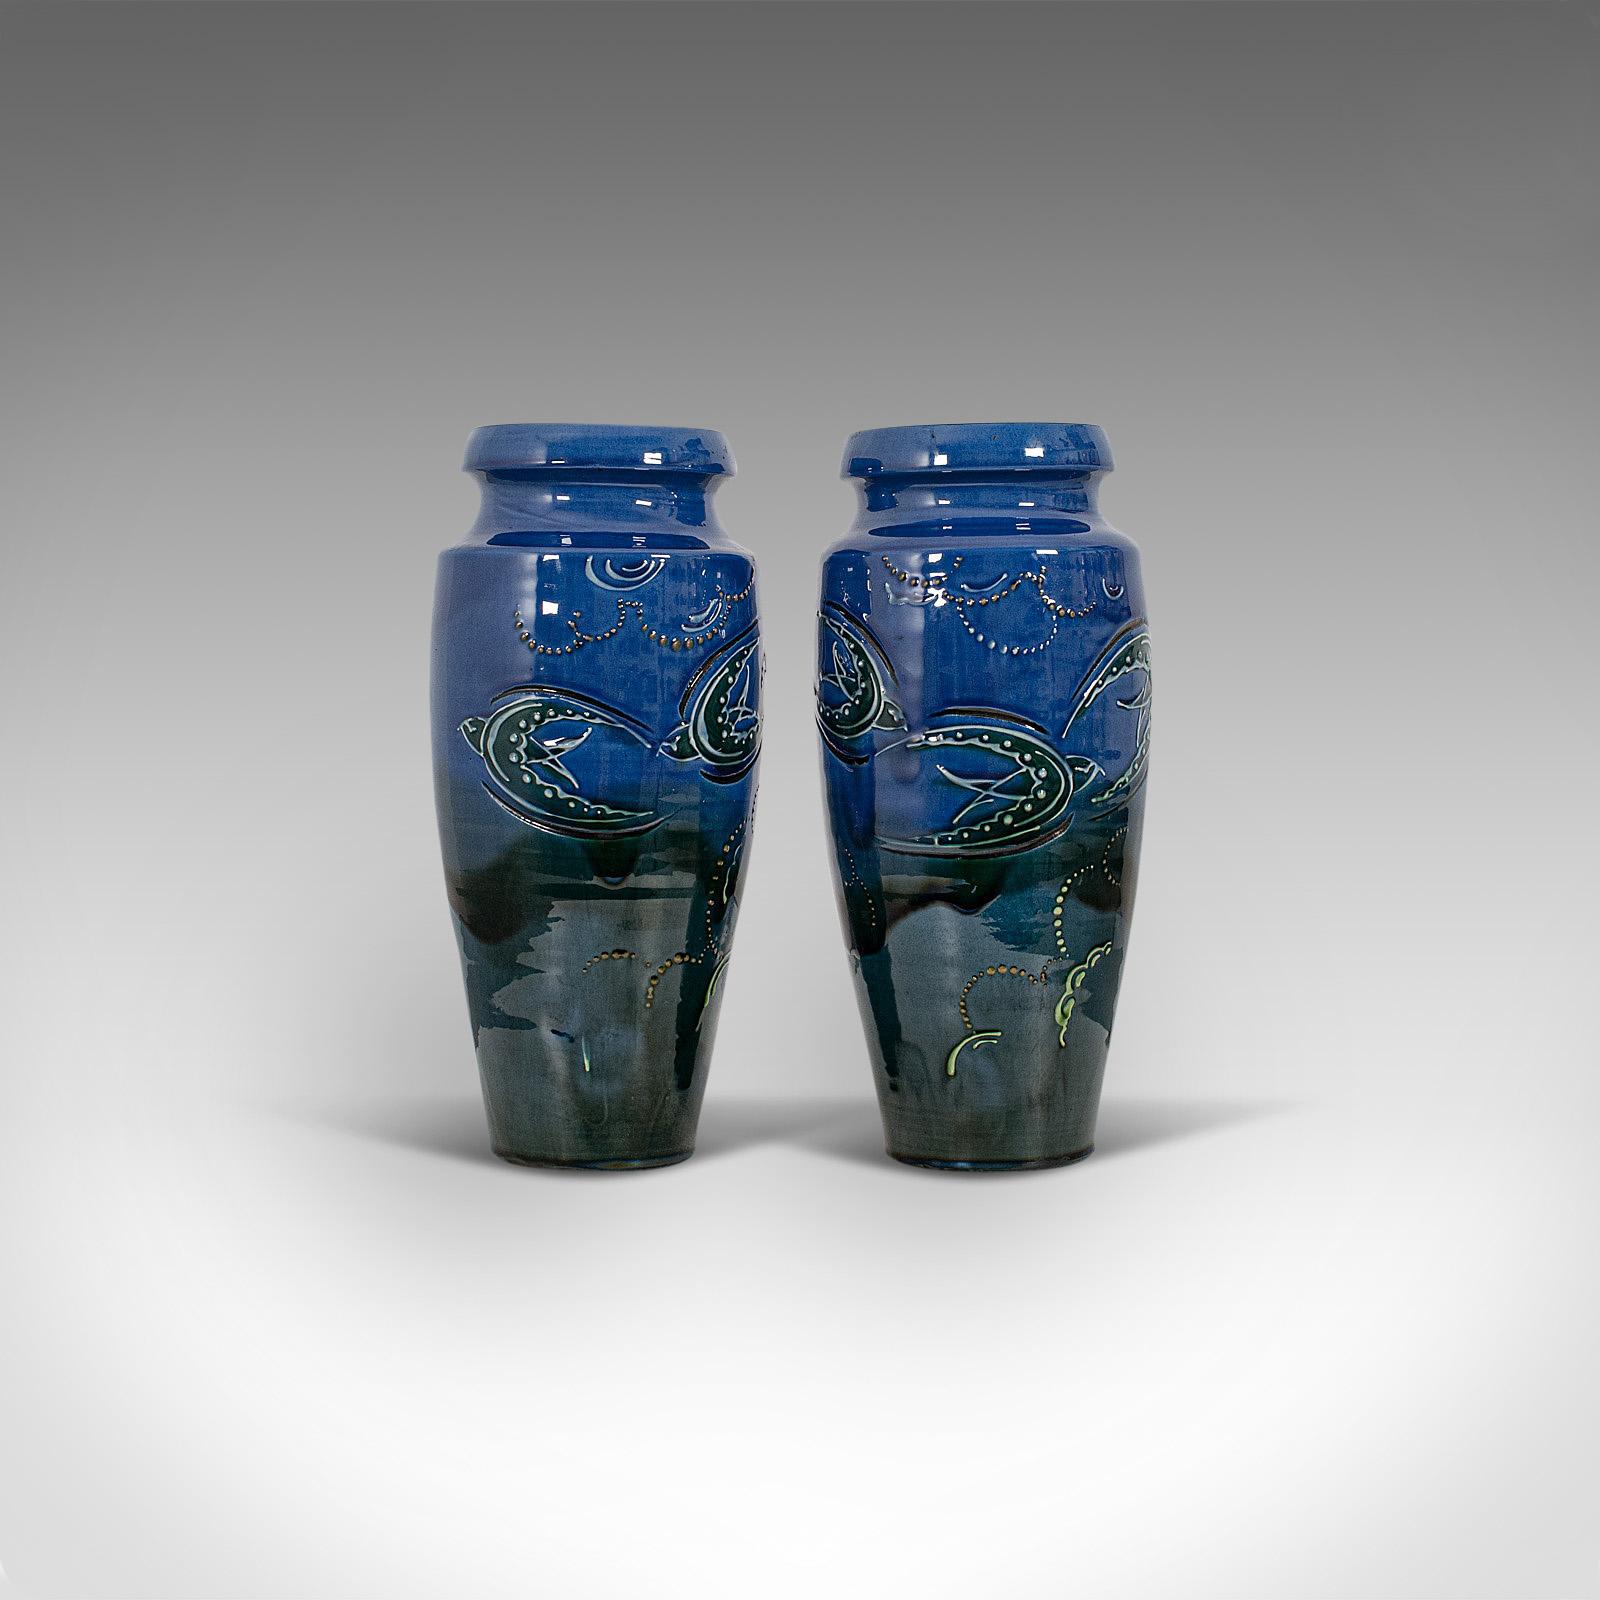 This is a pair of vintage decorative flower vases. An English, ceramic hand painted vase, dating to the early 20th century, circa 1930.

Appealing graduated palette and form
Displaying a desirable aged patina
Ceramic in good order, free of